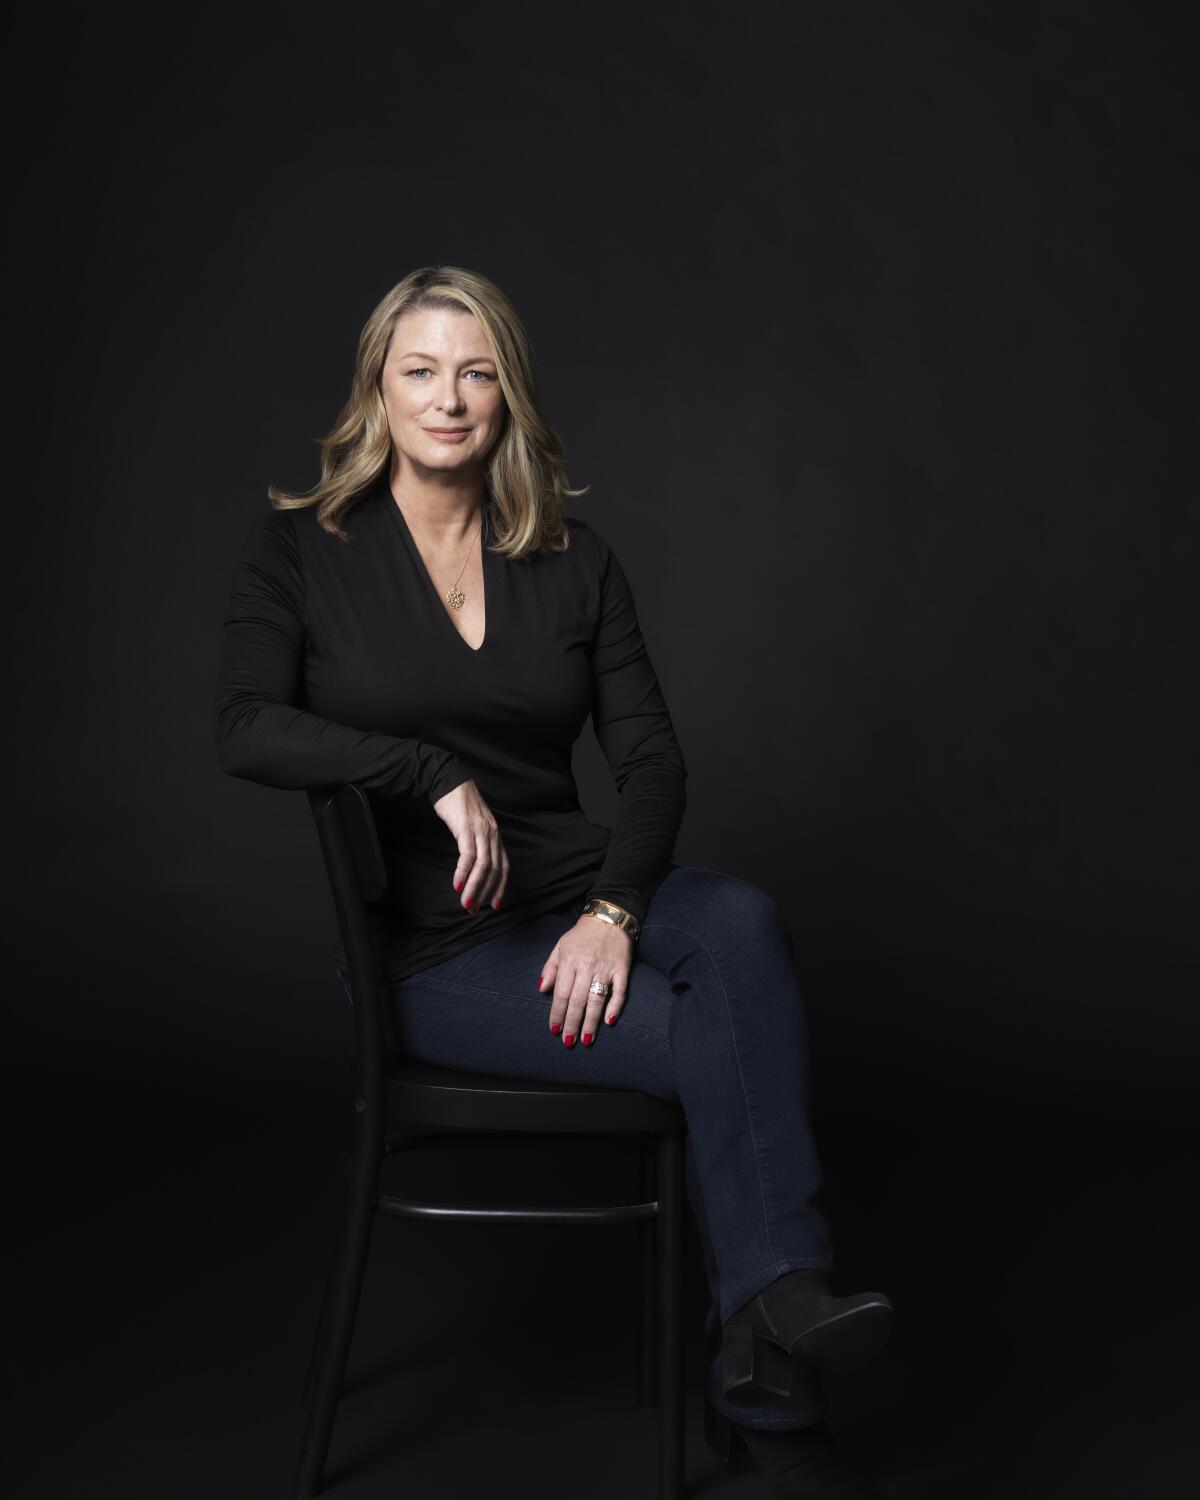 Kristin Hannah will appear as part of an "In Conversation" series at the Segerstrom Center.